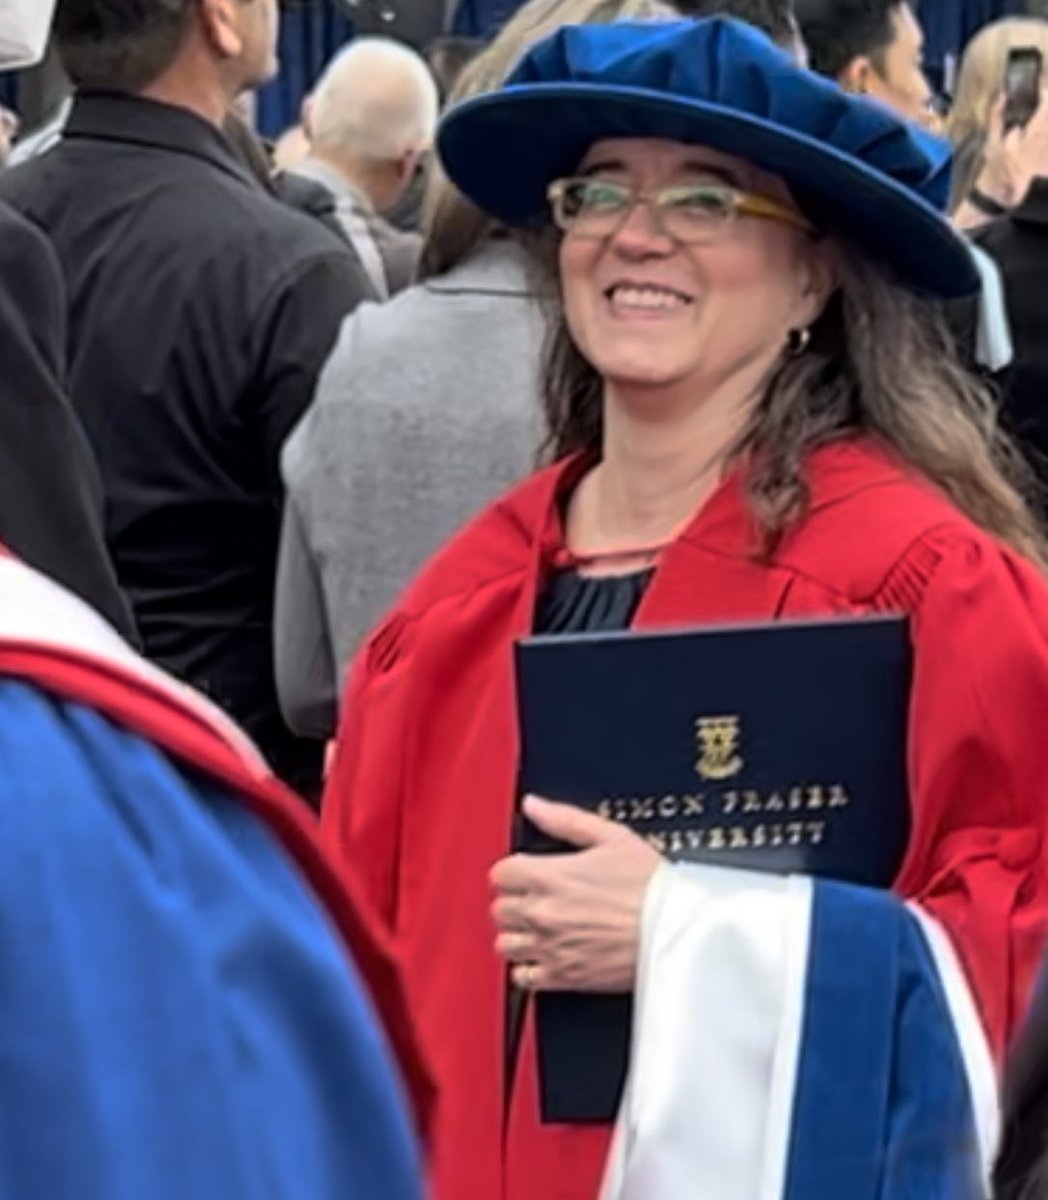 The smartest, wisest, loveliest person I know…Dr. Cherrie Wells. #mysfugrad